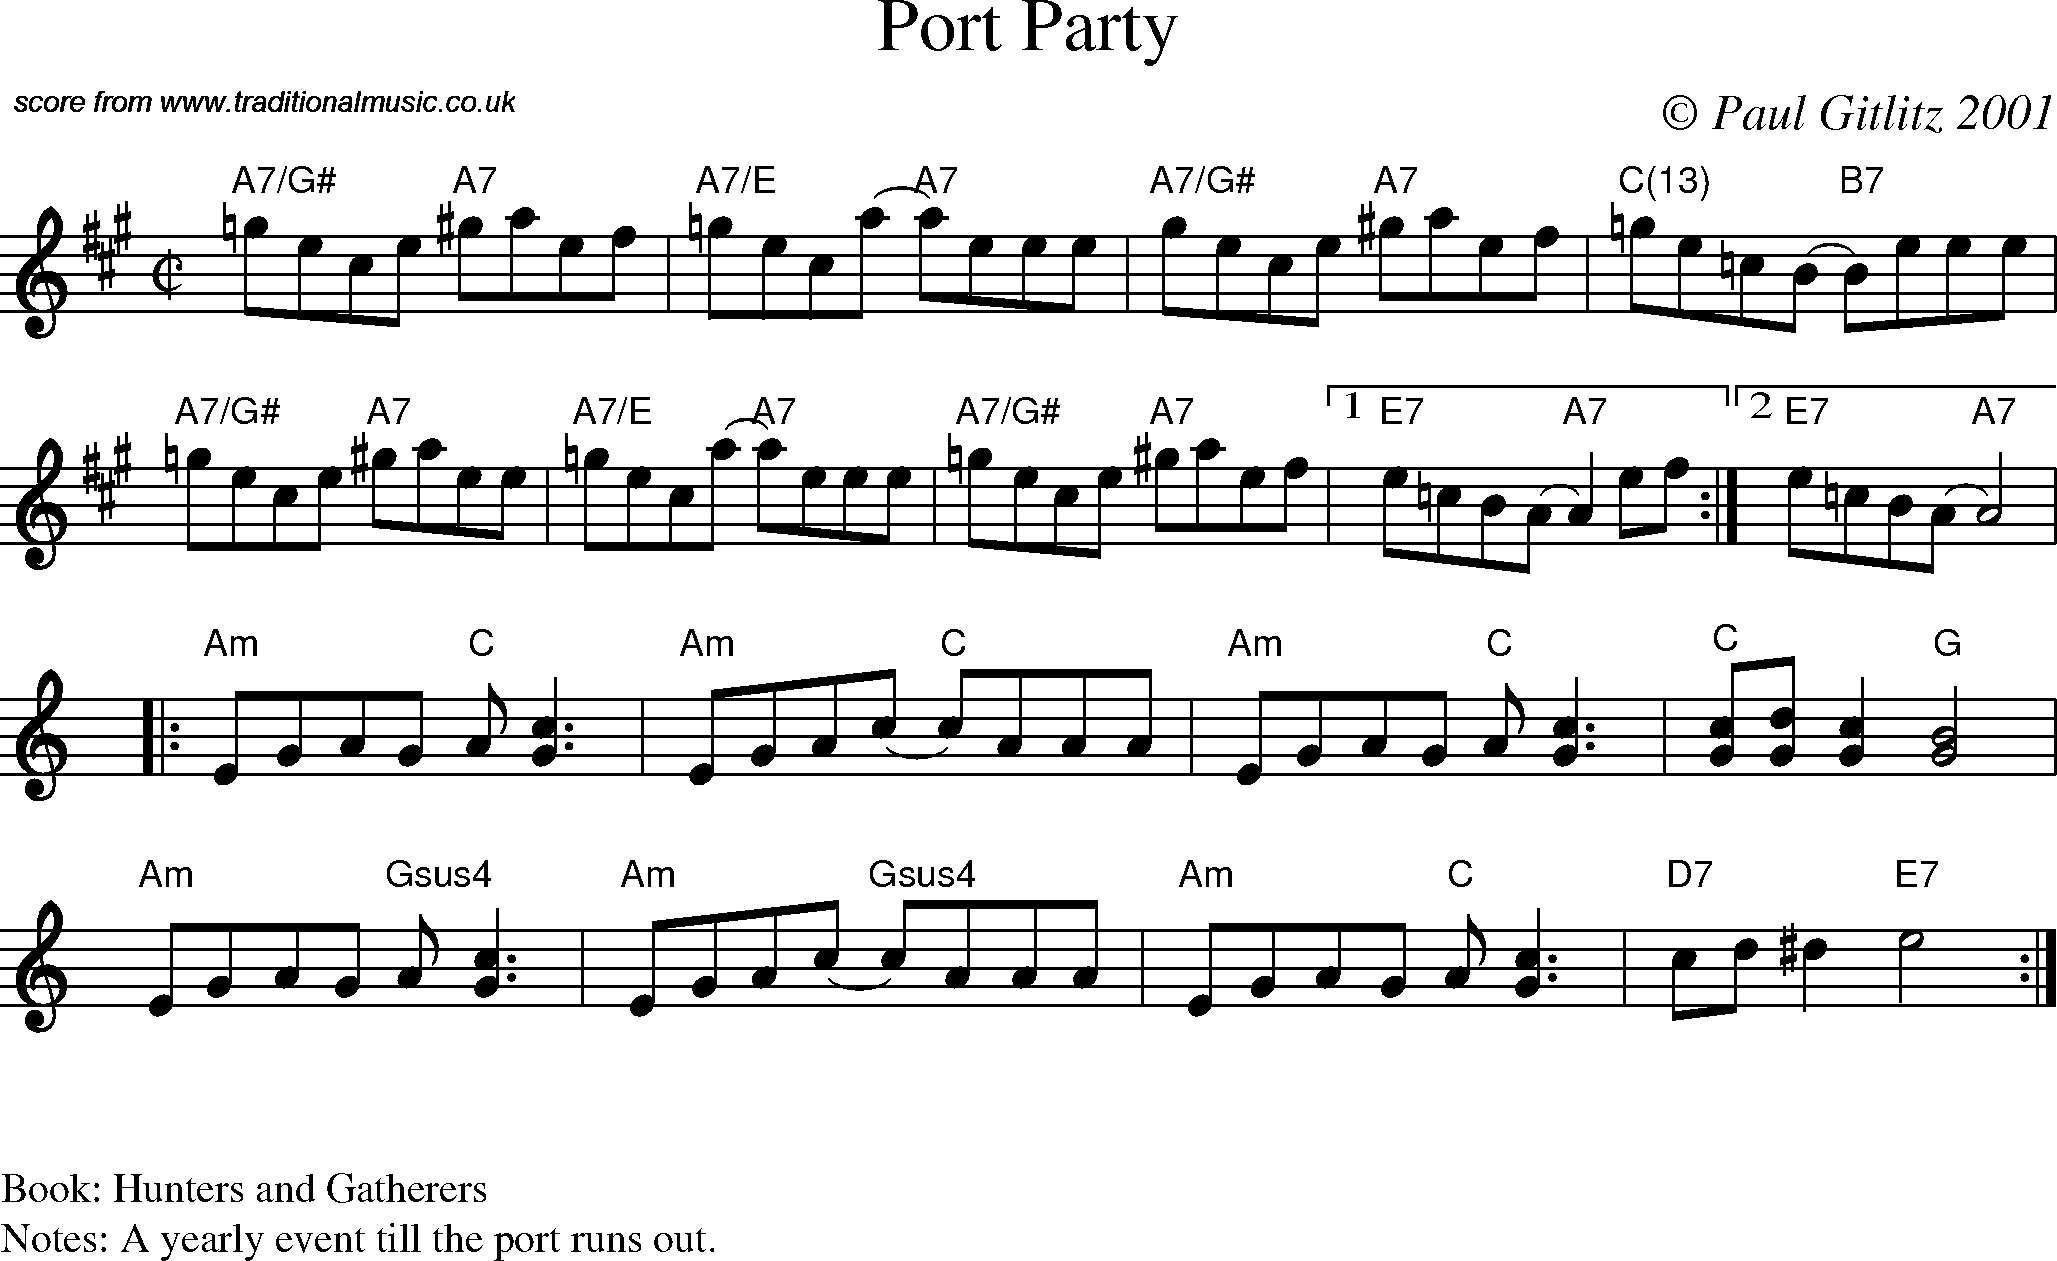 Sheet Music Score for Reel - Port Party